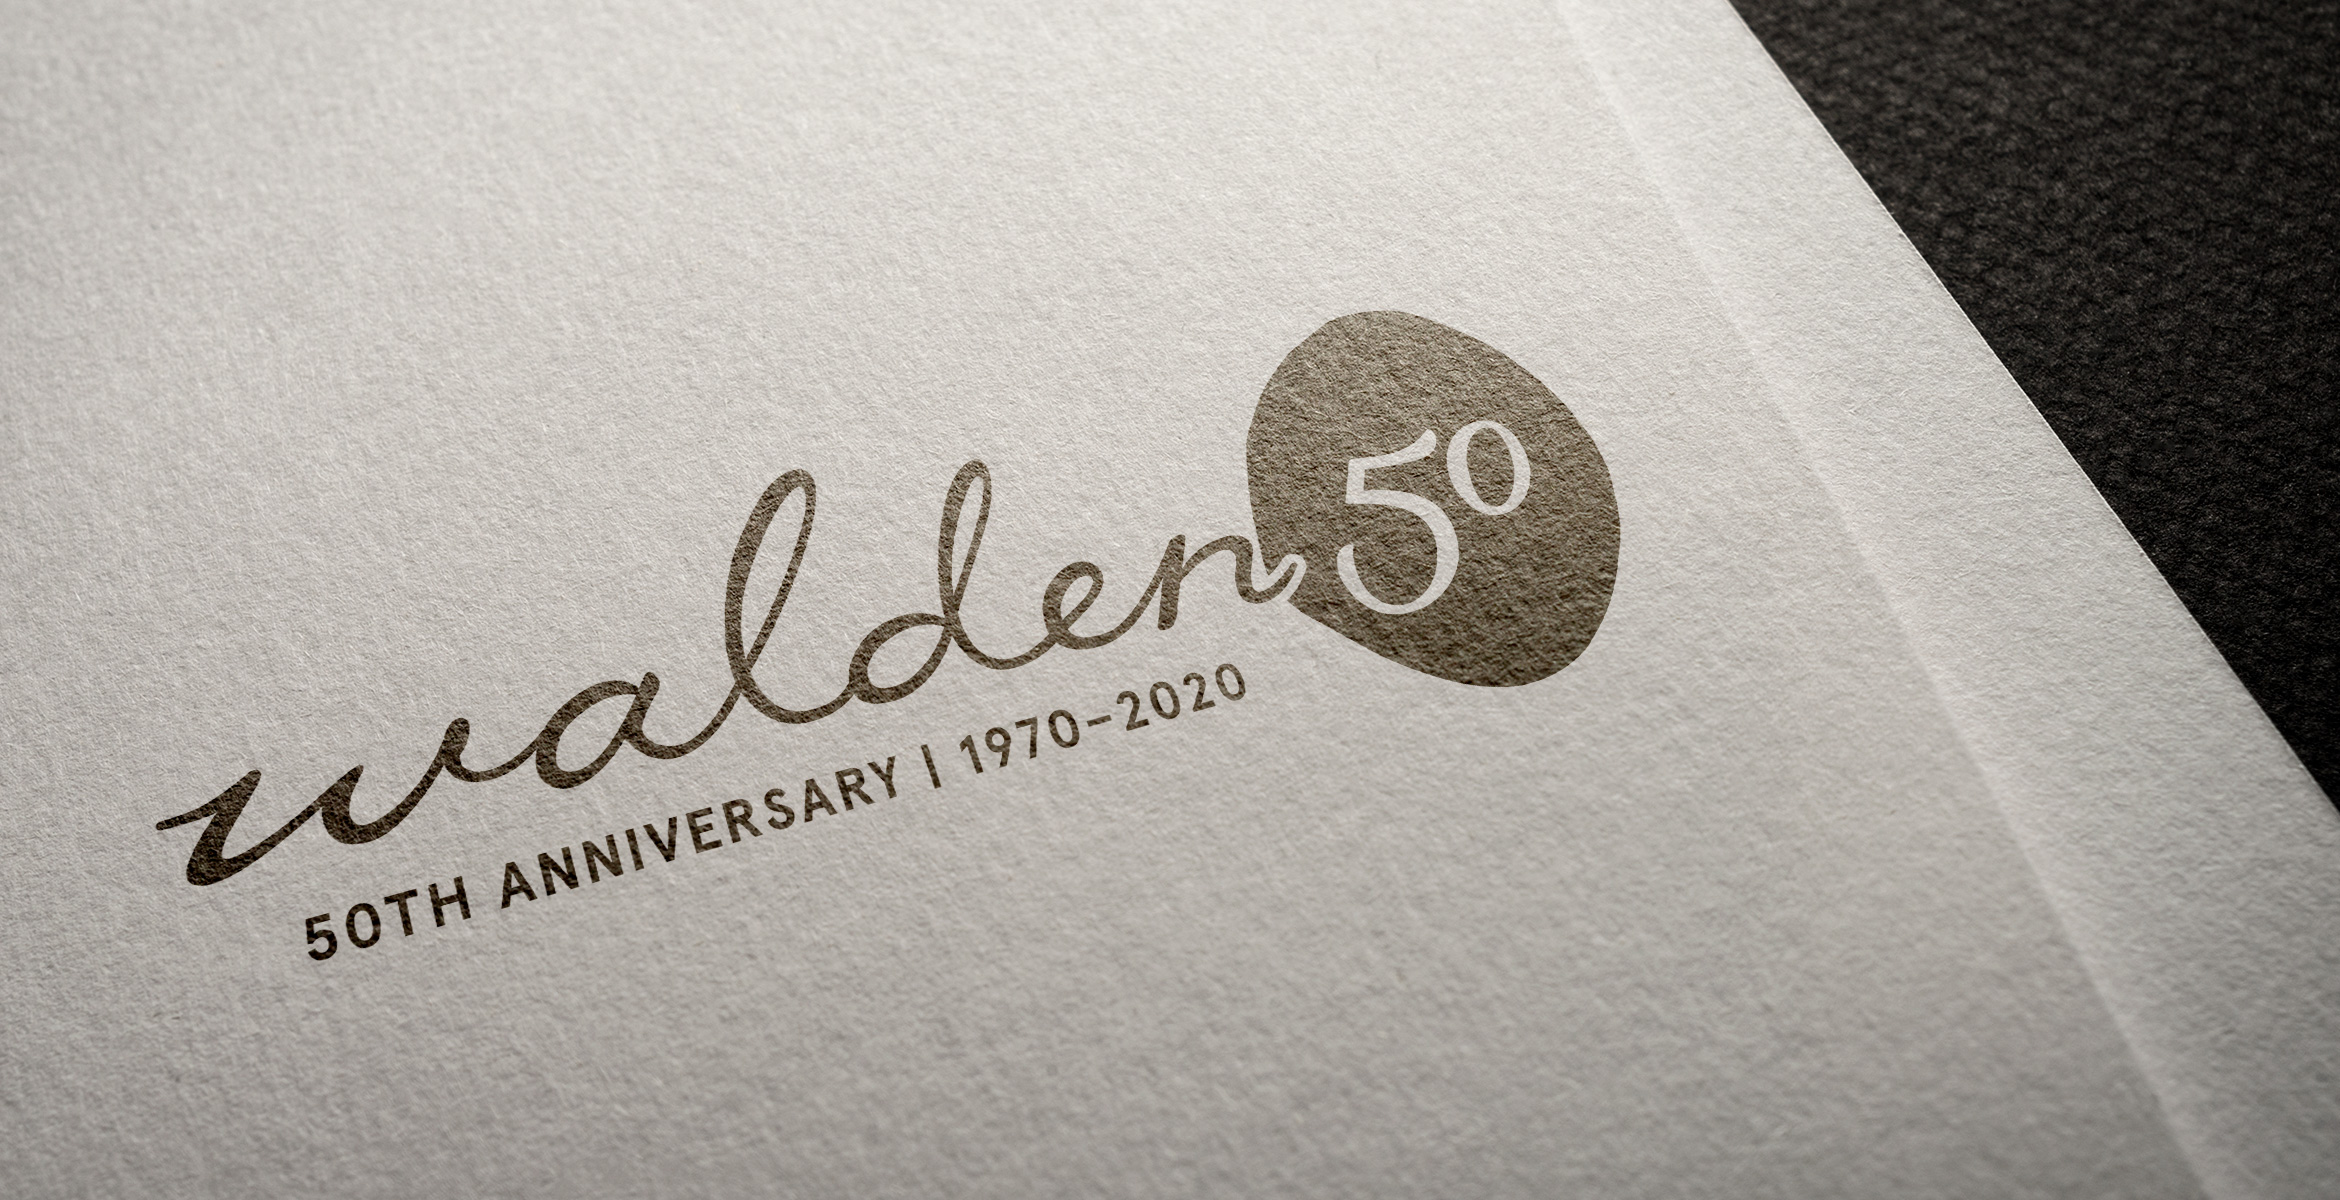 Anniversary logo from the Walden School rebrand designed by Kilter